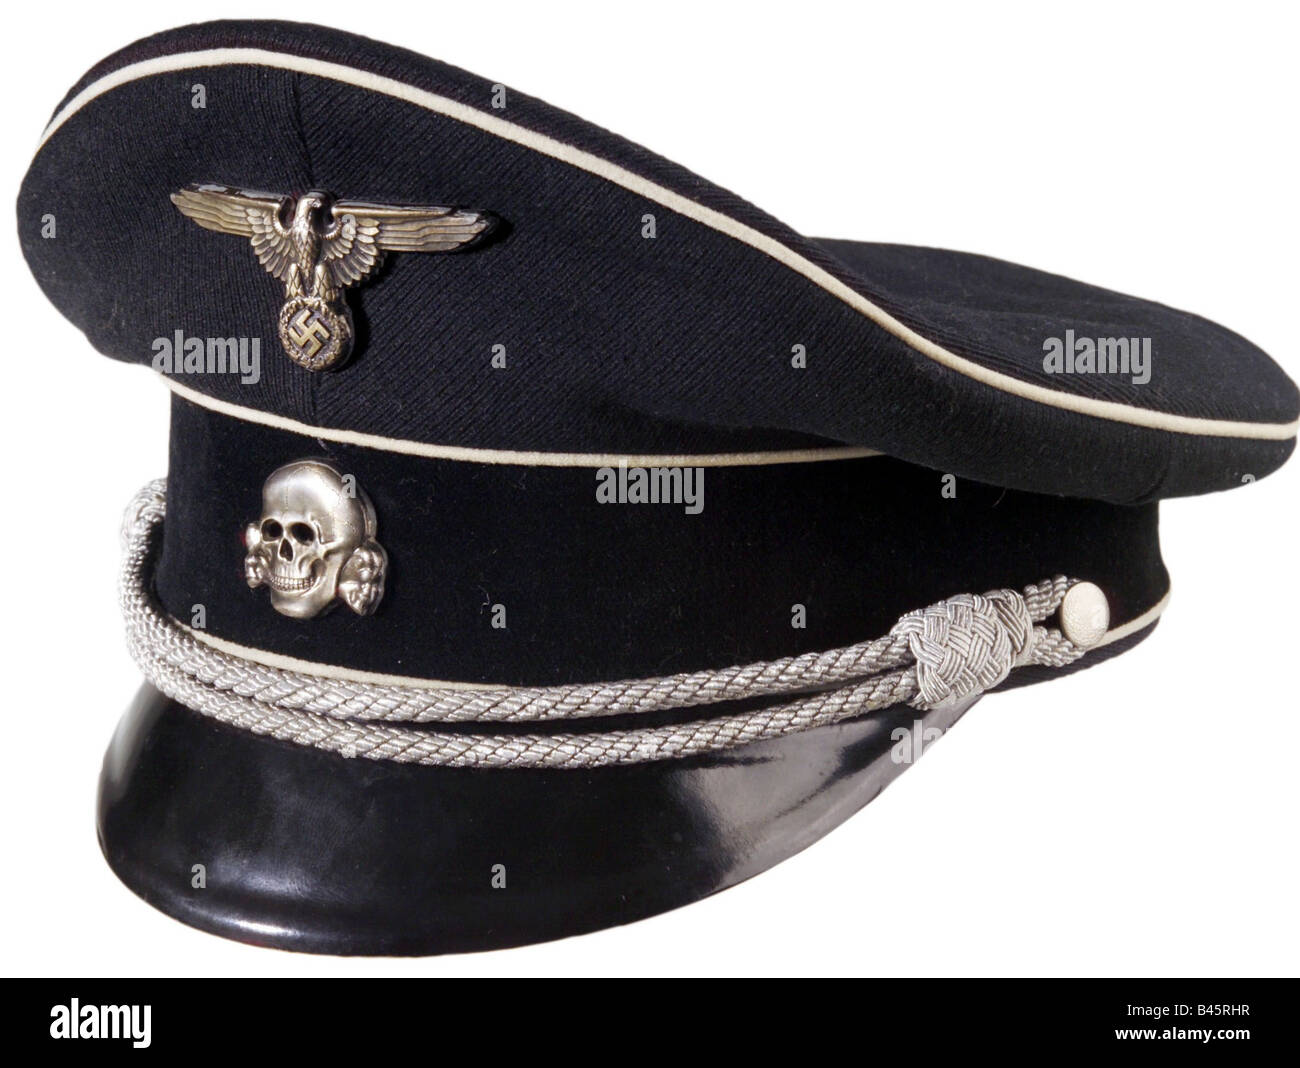 Ss Uniform High Resolution Stock Photography and Images - Alamy